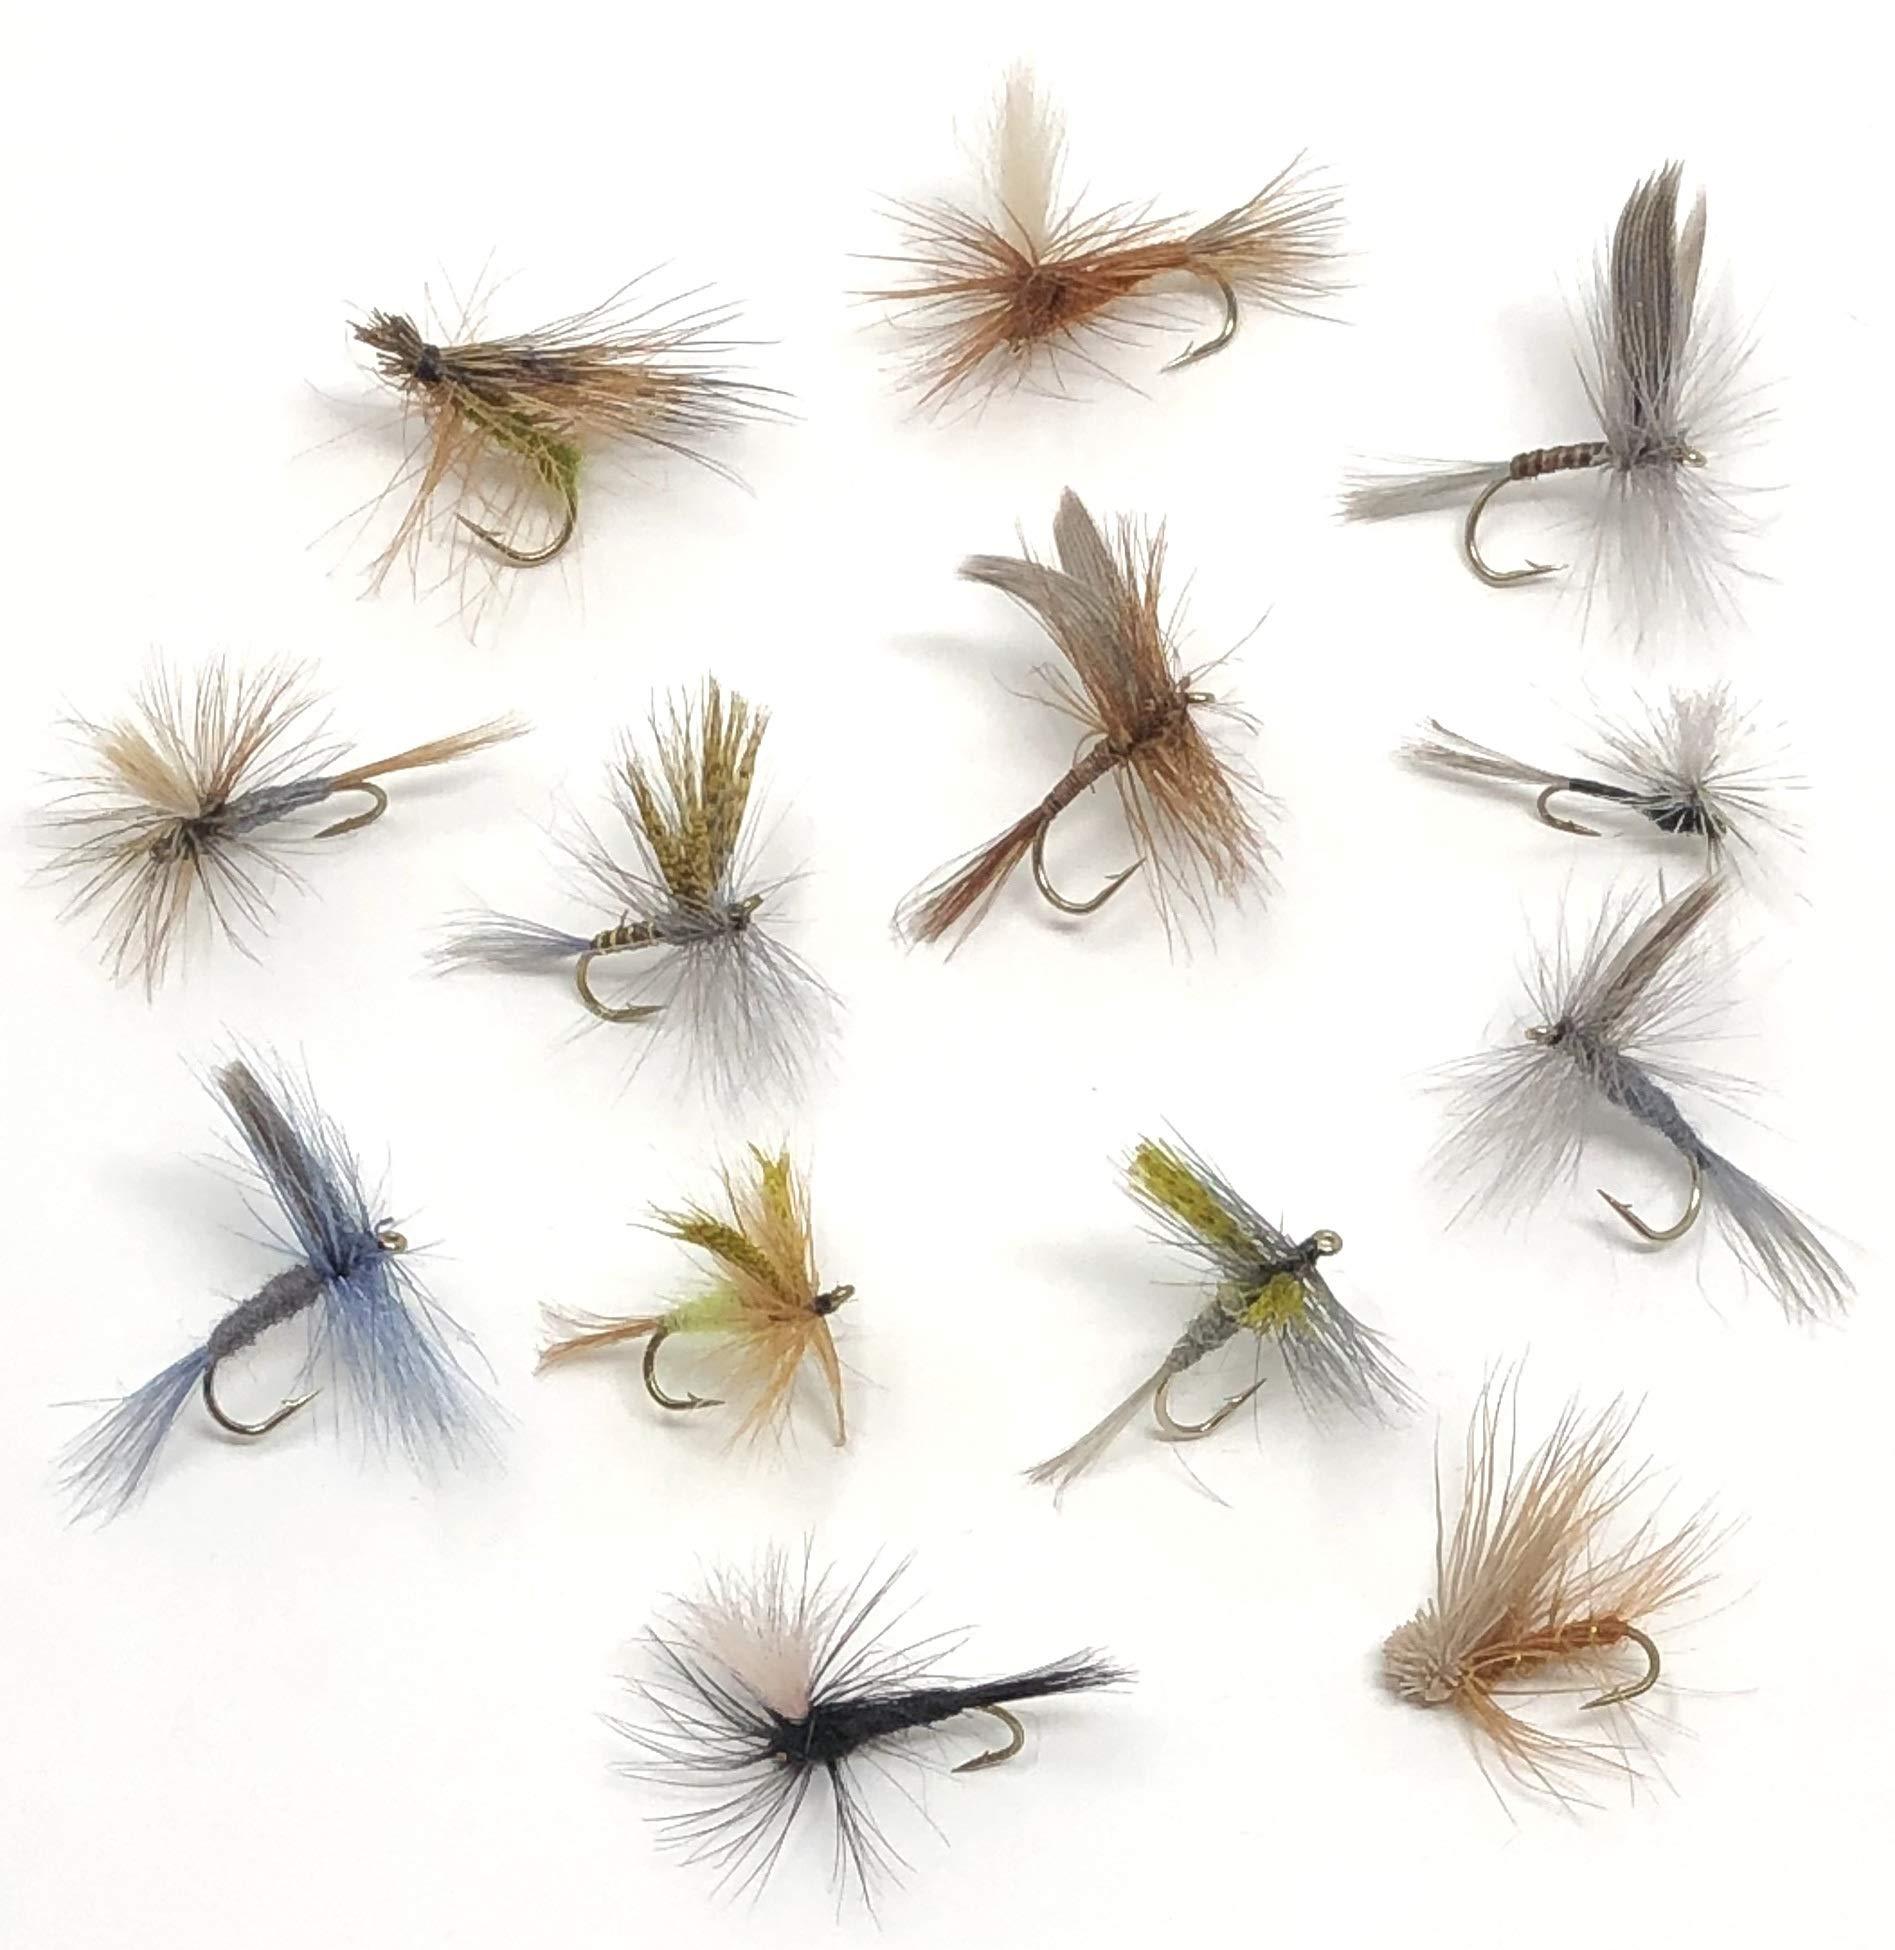 Feeder Creek Fly Fishing Lures Assortment, 15 Wet & Dry Fly Patterns for  Trout, Bass and Other Freshwater Fish, Includes Bead Head Nymphs, Emerger,  Pupa and Mor…